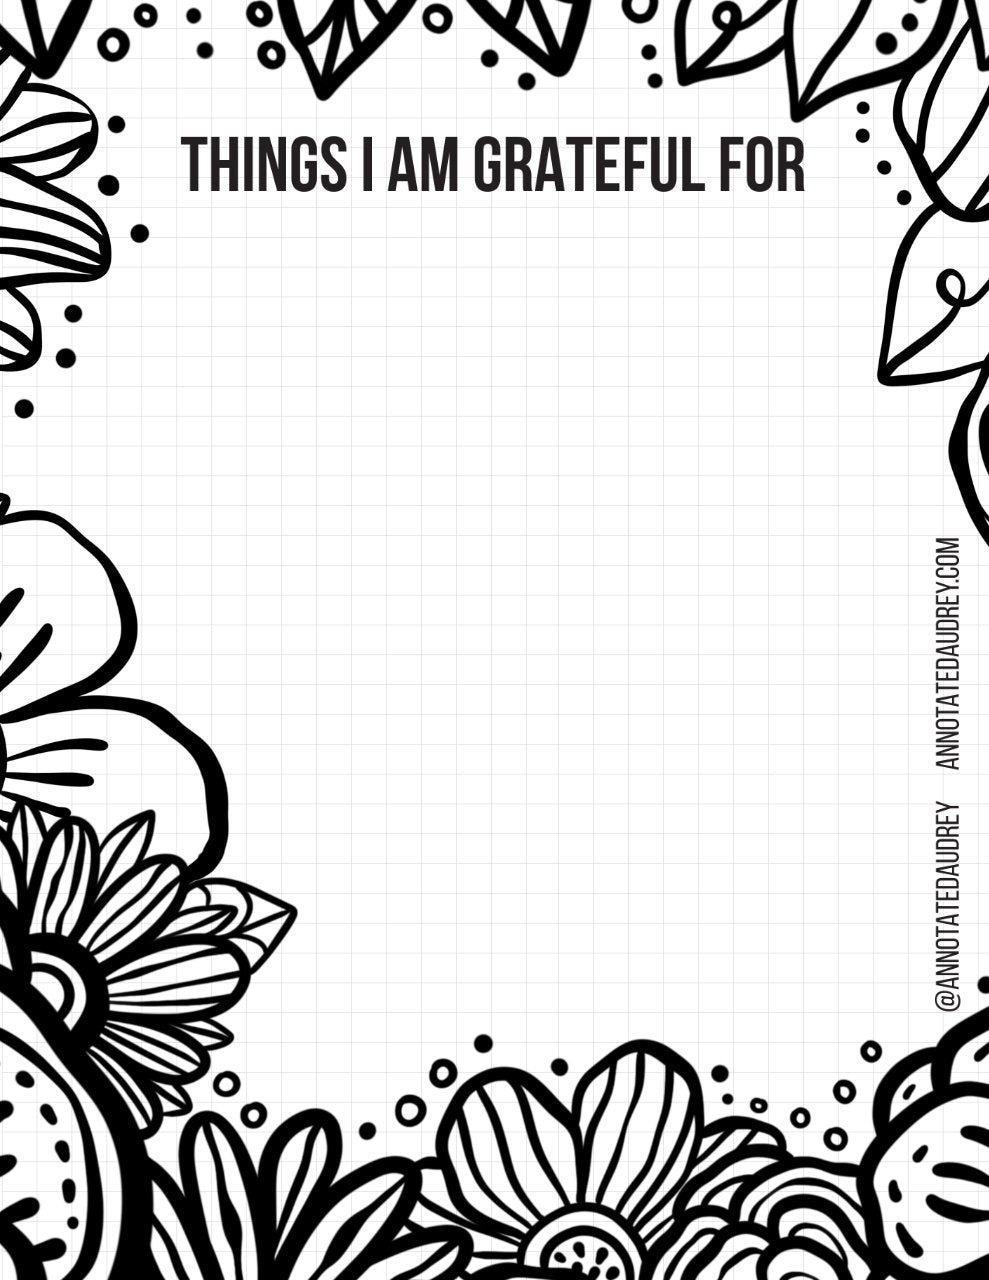 FREE PRINTABLE Things I Am Grateful For ANNOTATED AUDREY